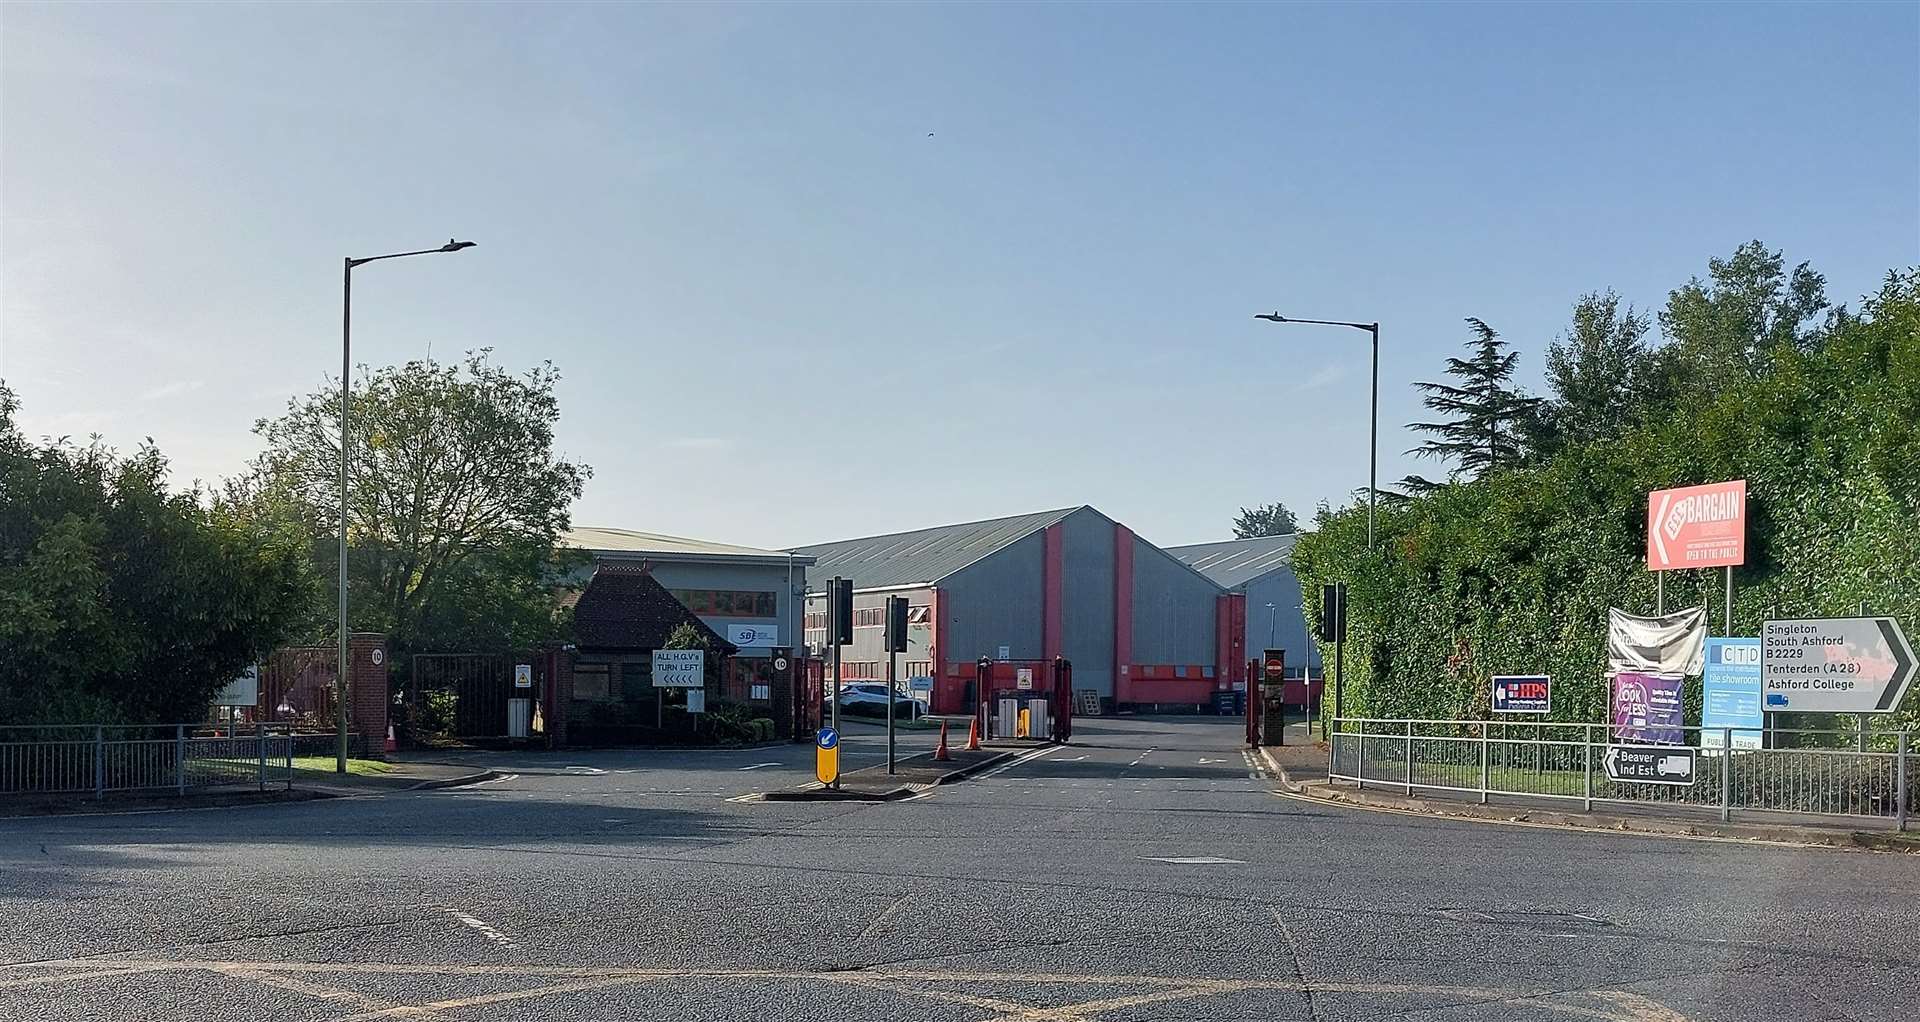 The Beaver Industrial Estate is along Beaver Road and Norman Road